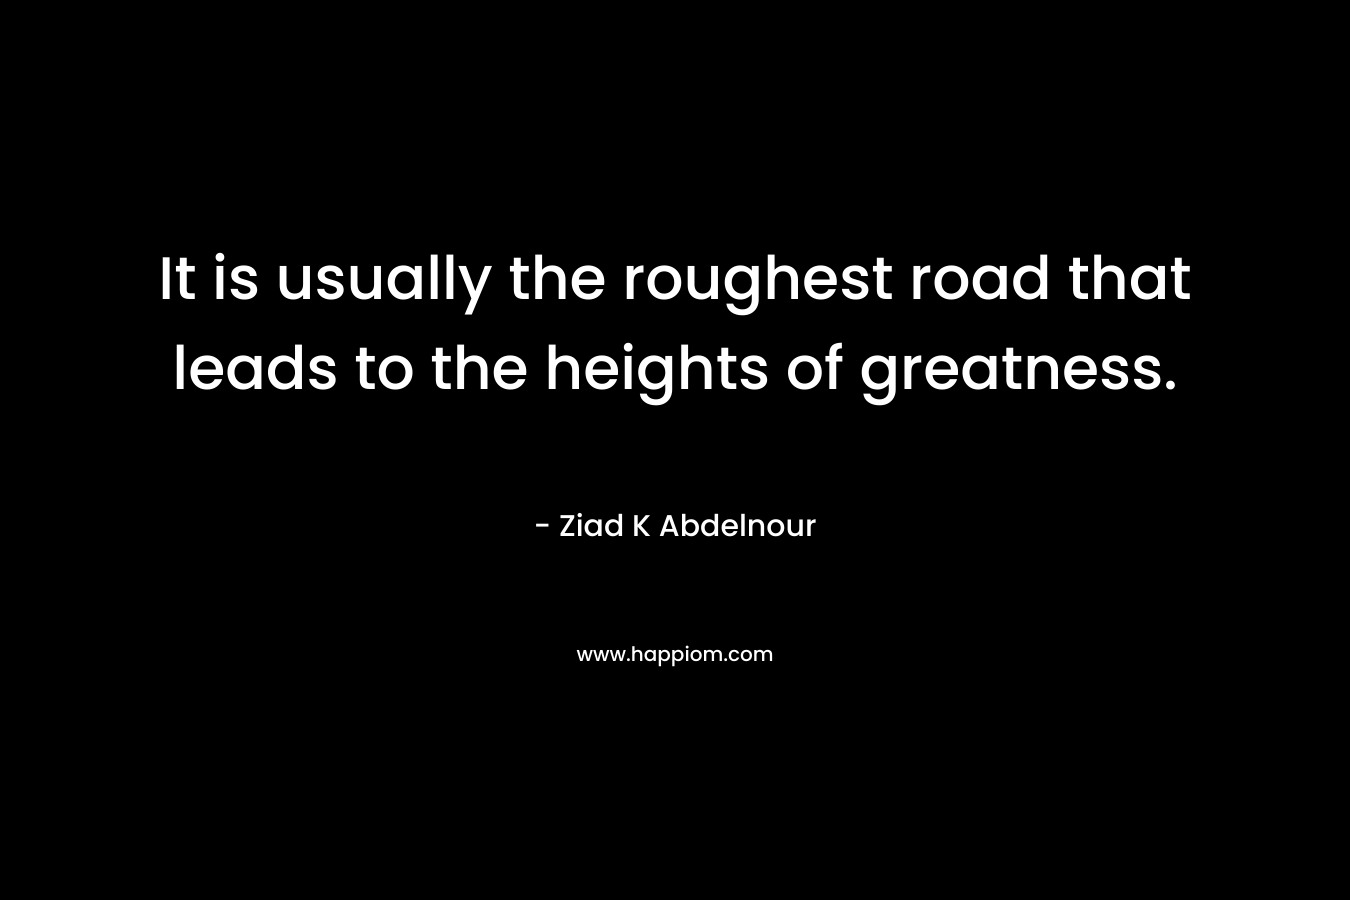 It is usually the roughest road that leads to the heights of greatness.